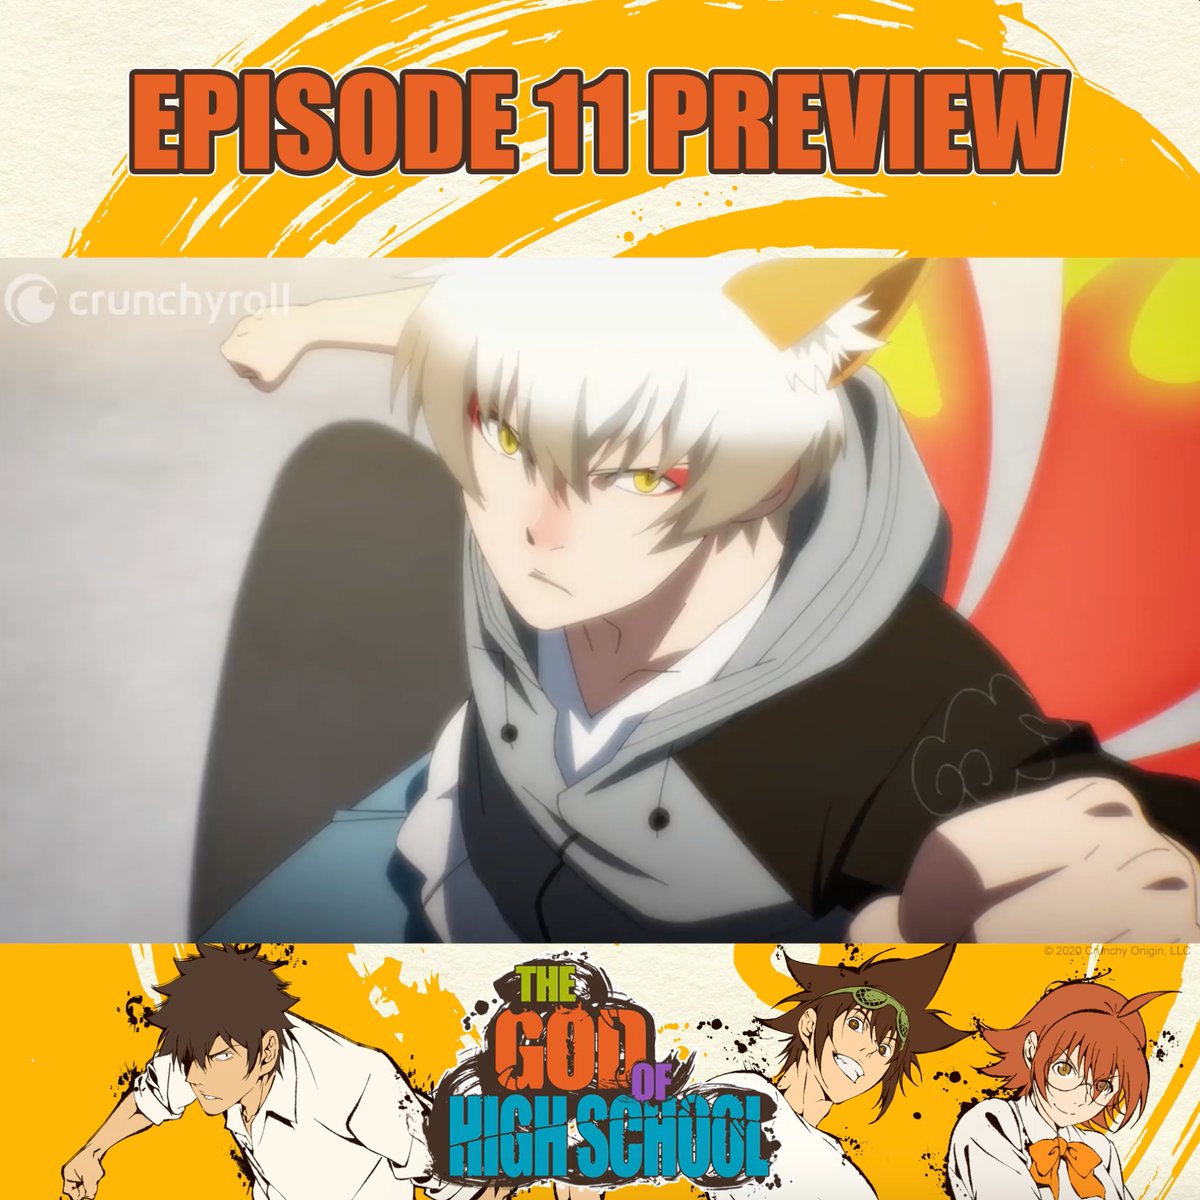 Crunchyroll - Exclusive Preview of The God of High School